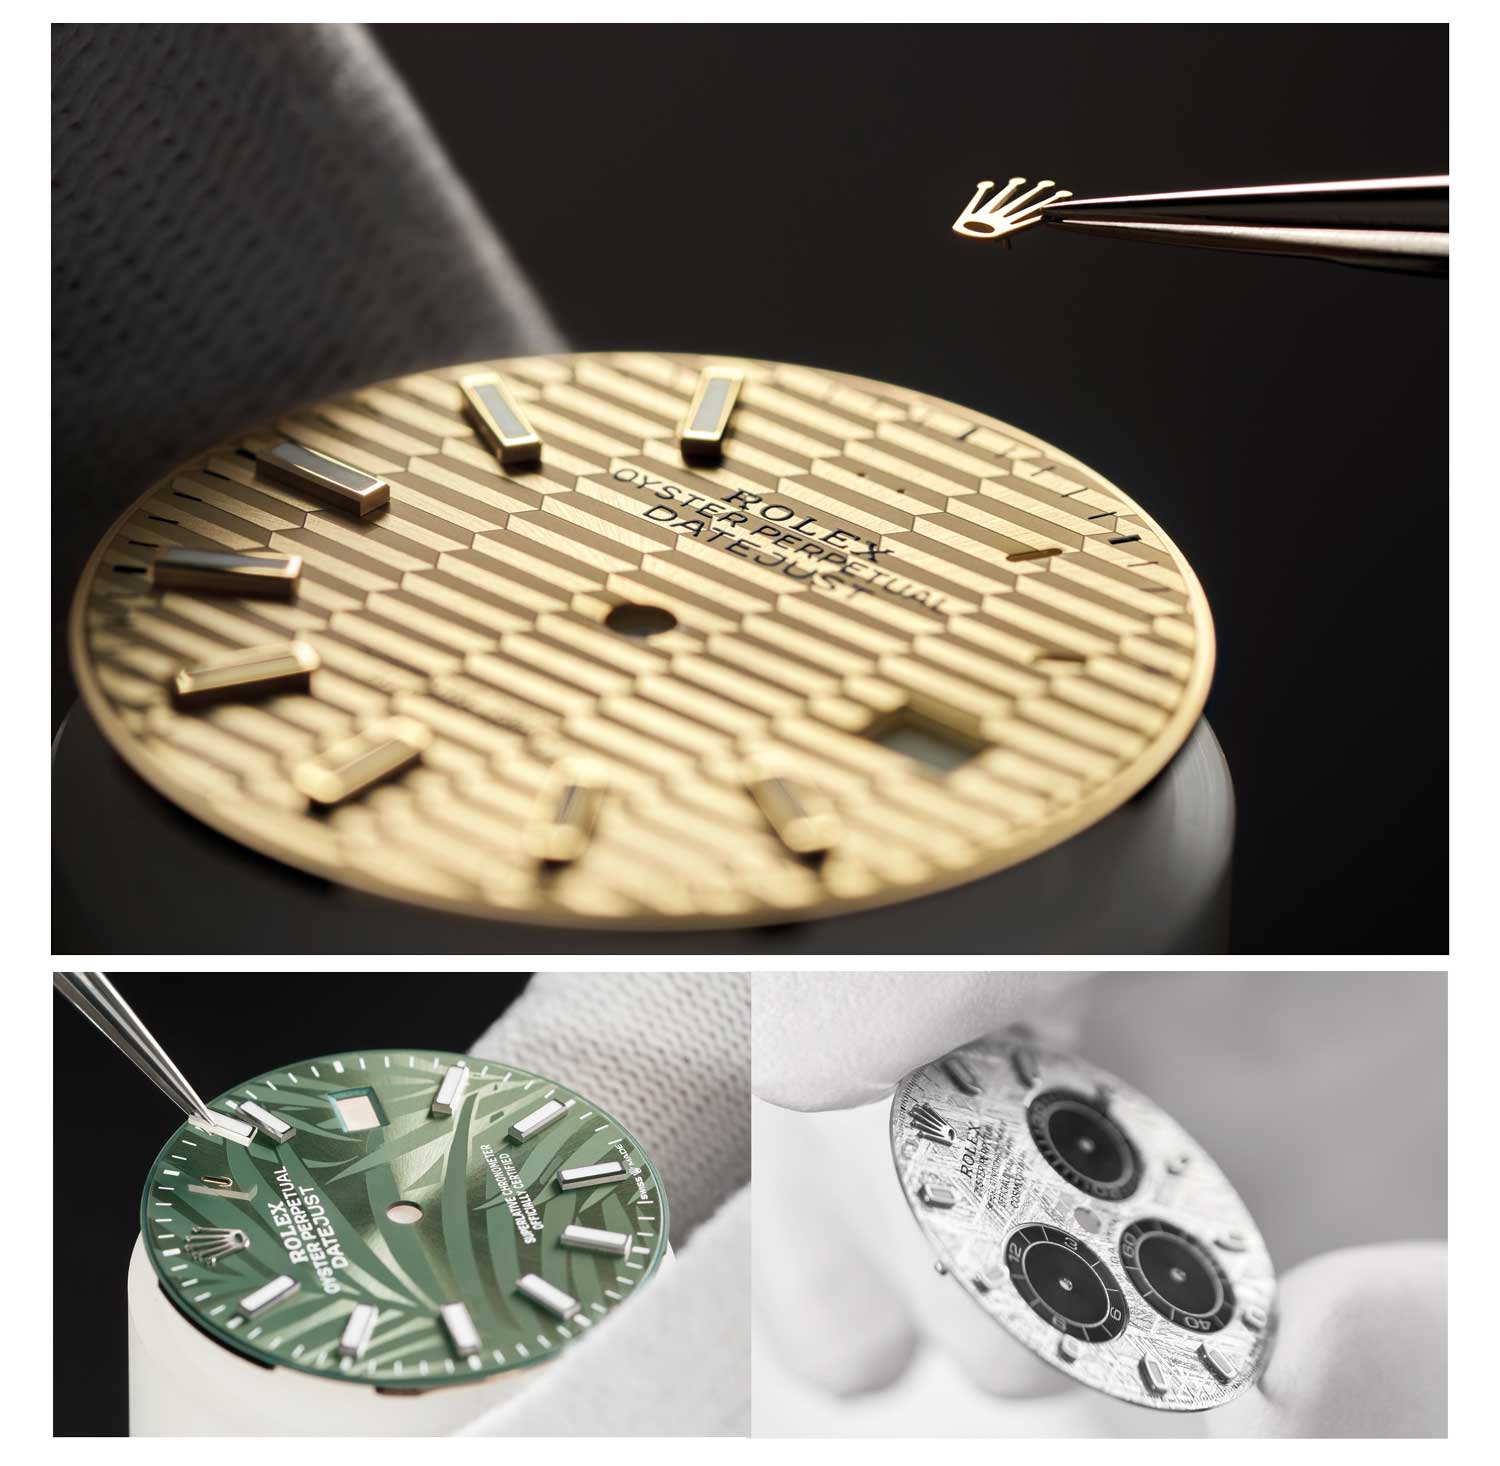 The appliques are set once the dial surface is finished to Rolex's exacting standards